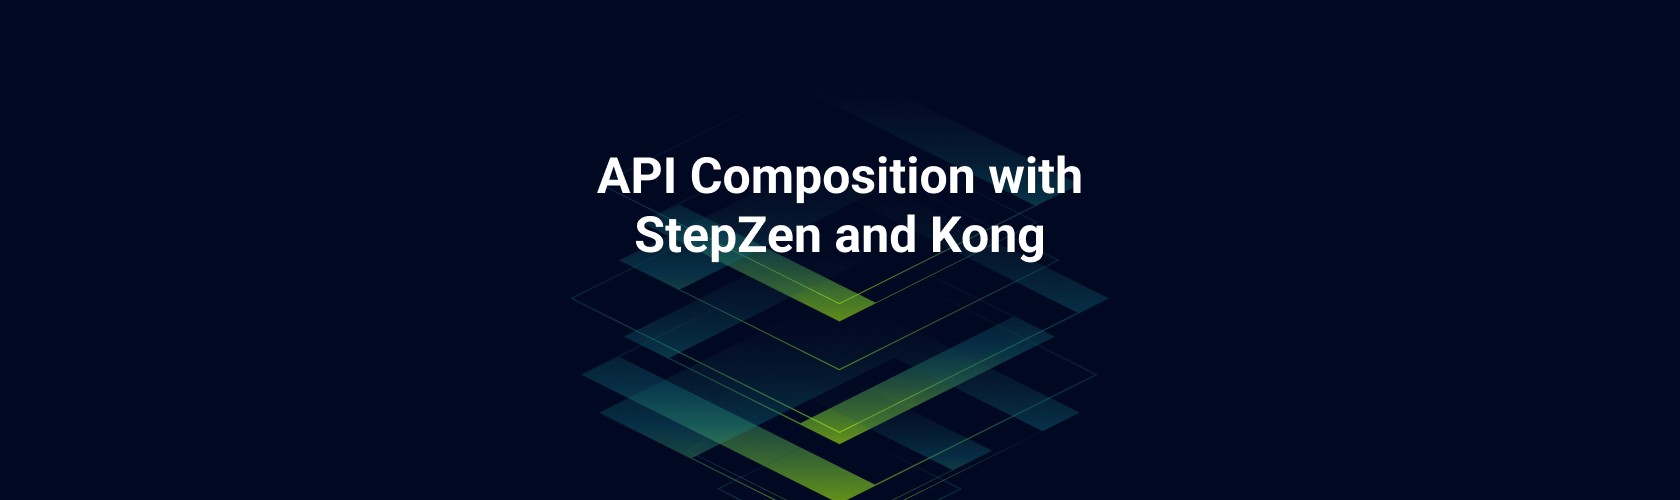 API Composition with StepZen and Kong